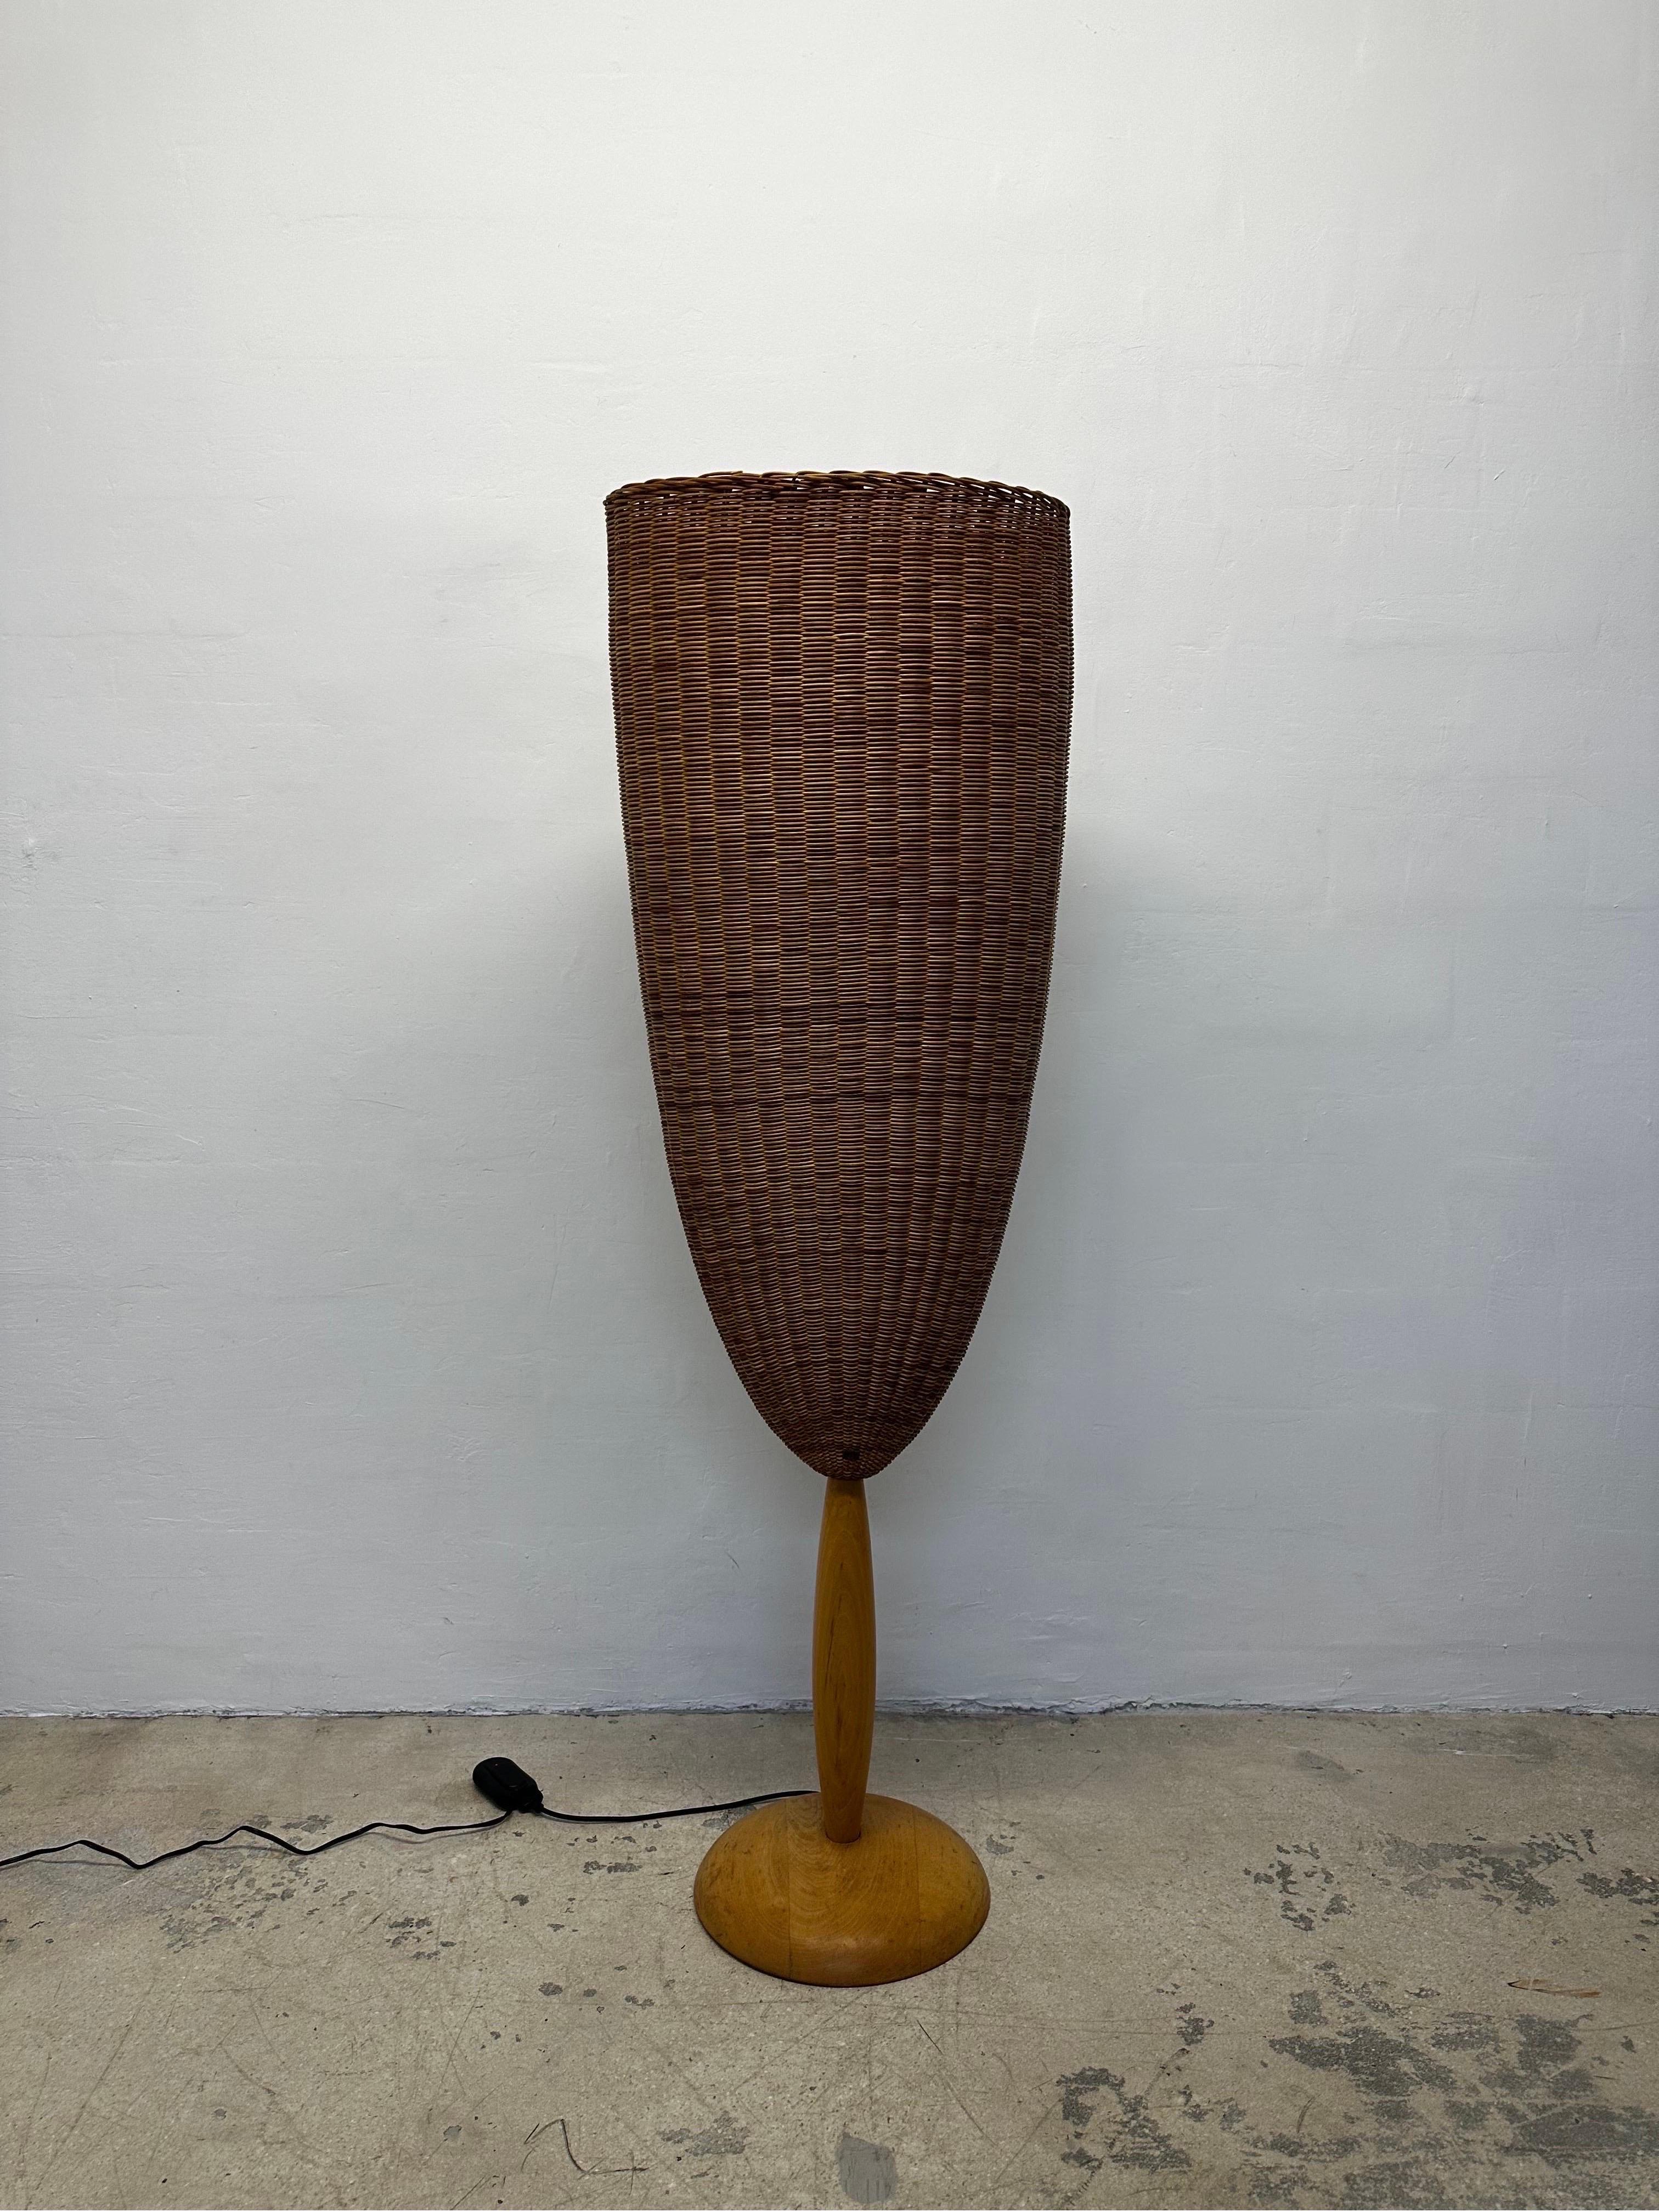 Organic modern Flûte floor lamp with large woven cane lamp shade that sits upon a beech wood carved base designed by Marco Agnoli for Pierantonio Bonacina, Italy 1991.